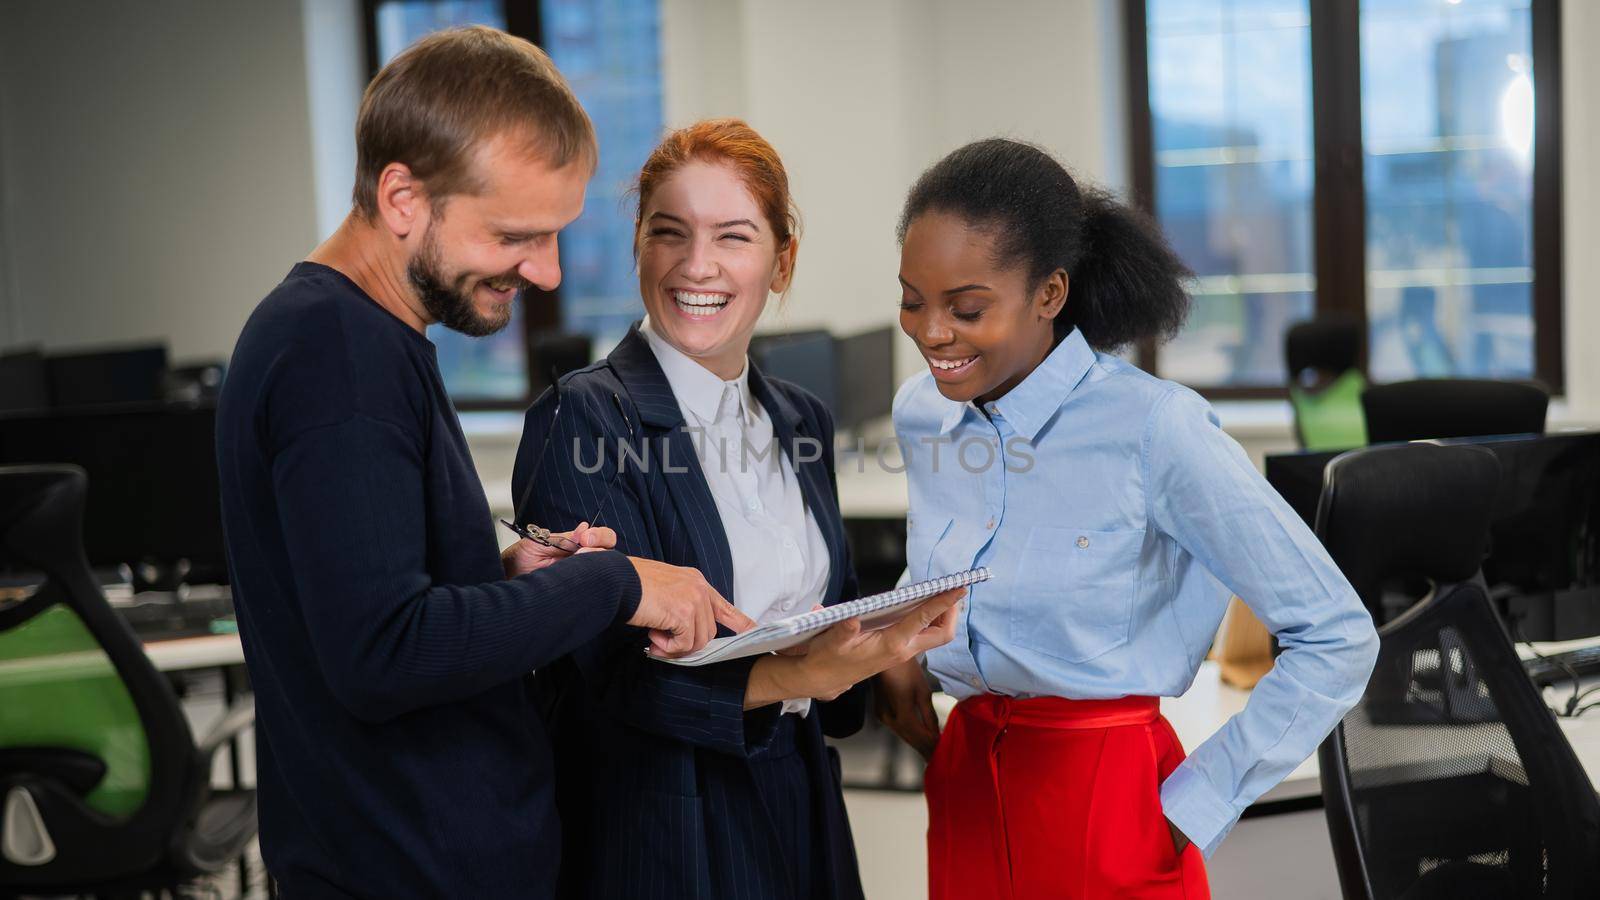 Colleagues discuss work. African young woman, caucasian man and red-haired caucasian woman communicate in the office